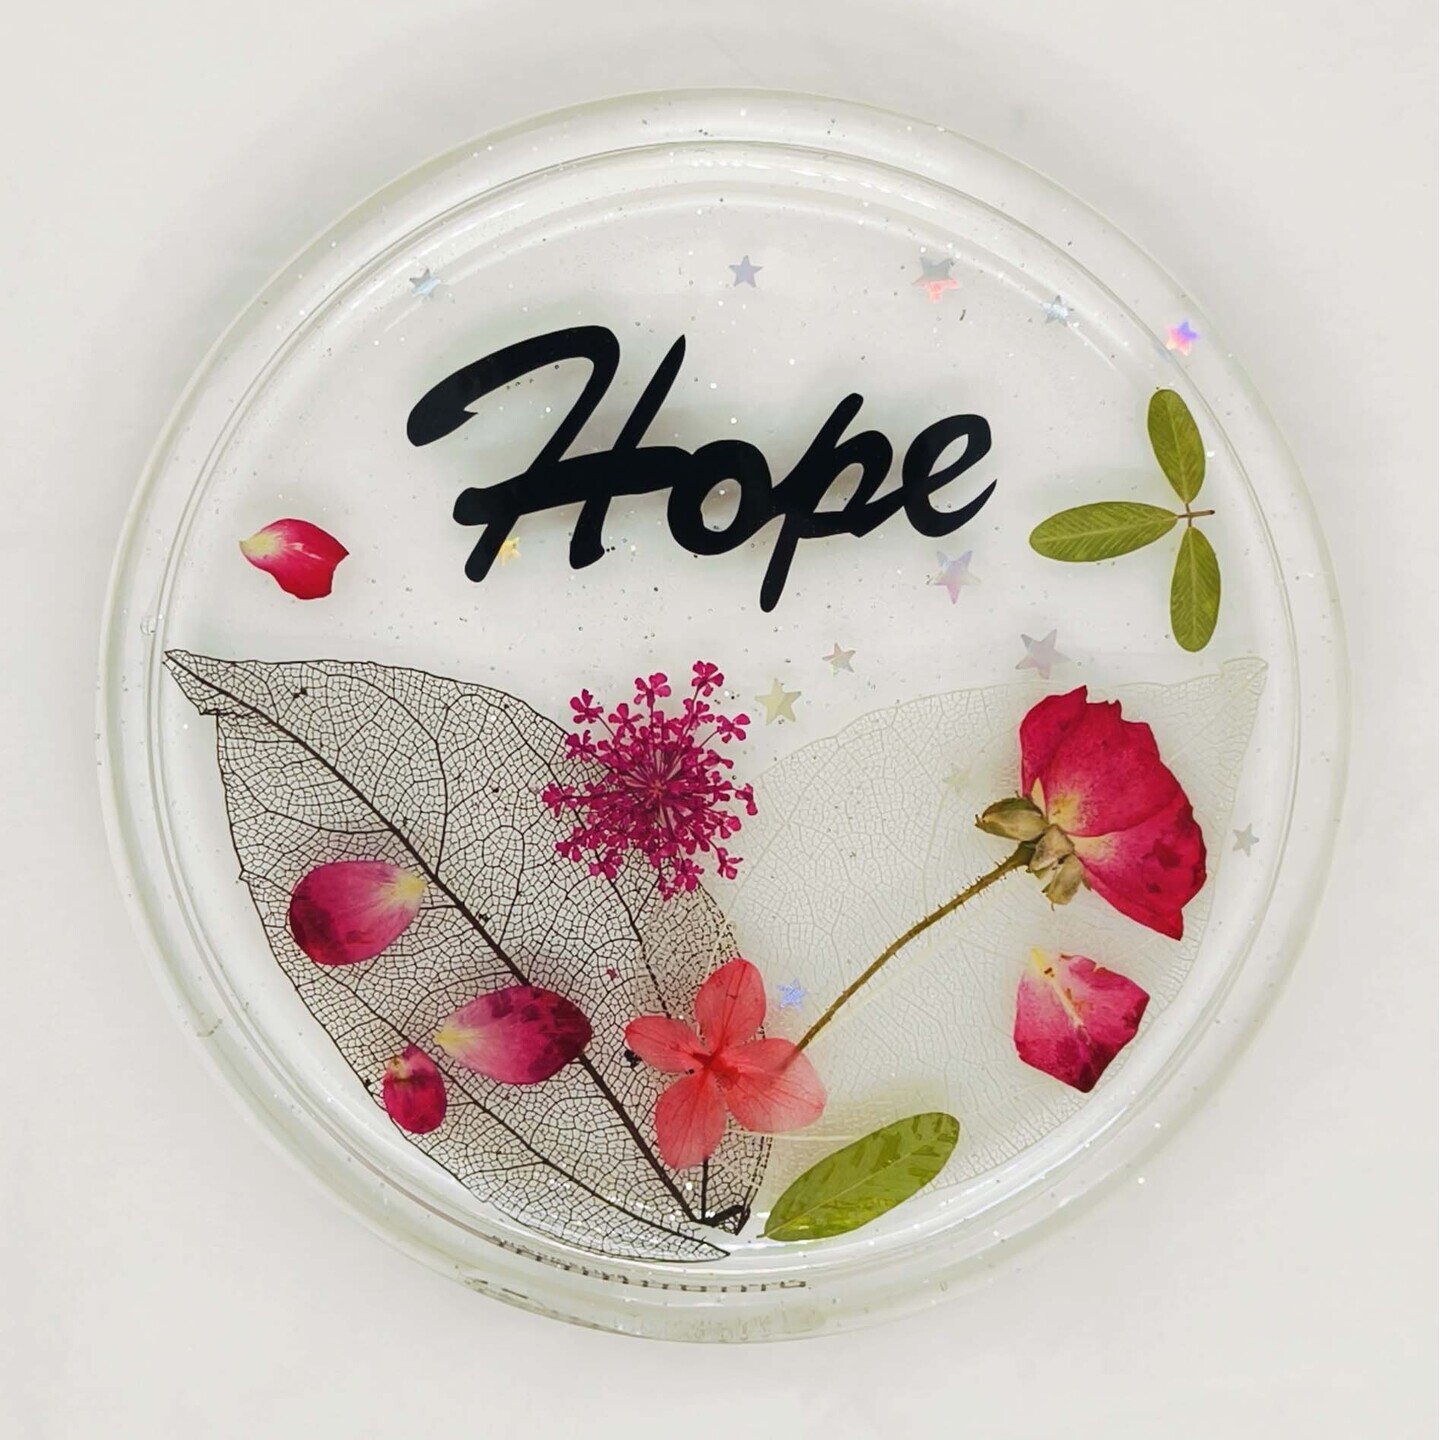 Hope |  Real Pressed Flowers & Leaves Resin Coaster with an inspirational word| Handmade 🖐️